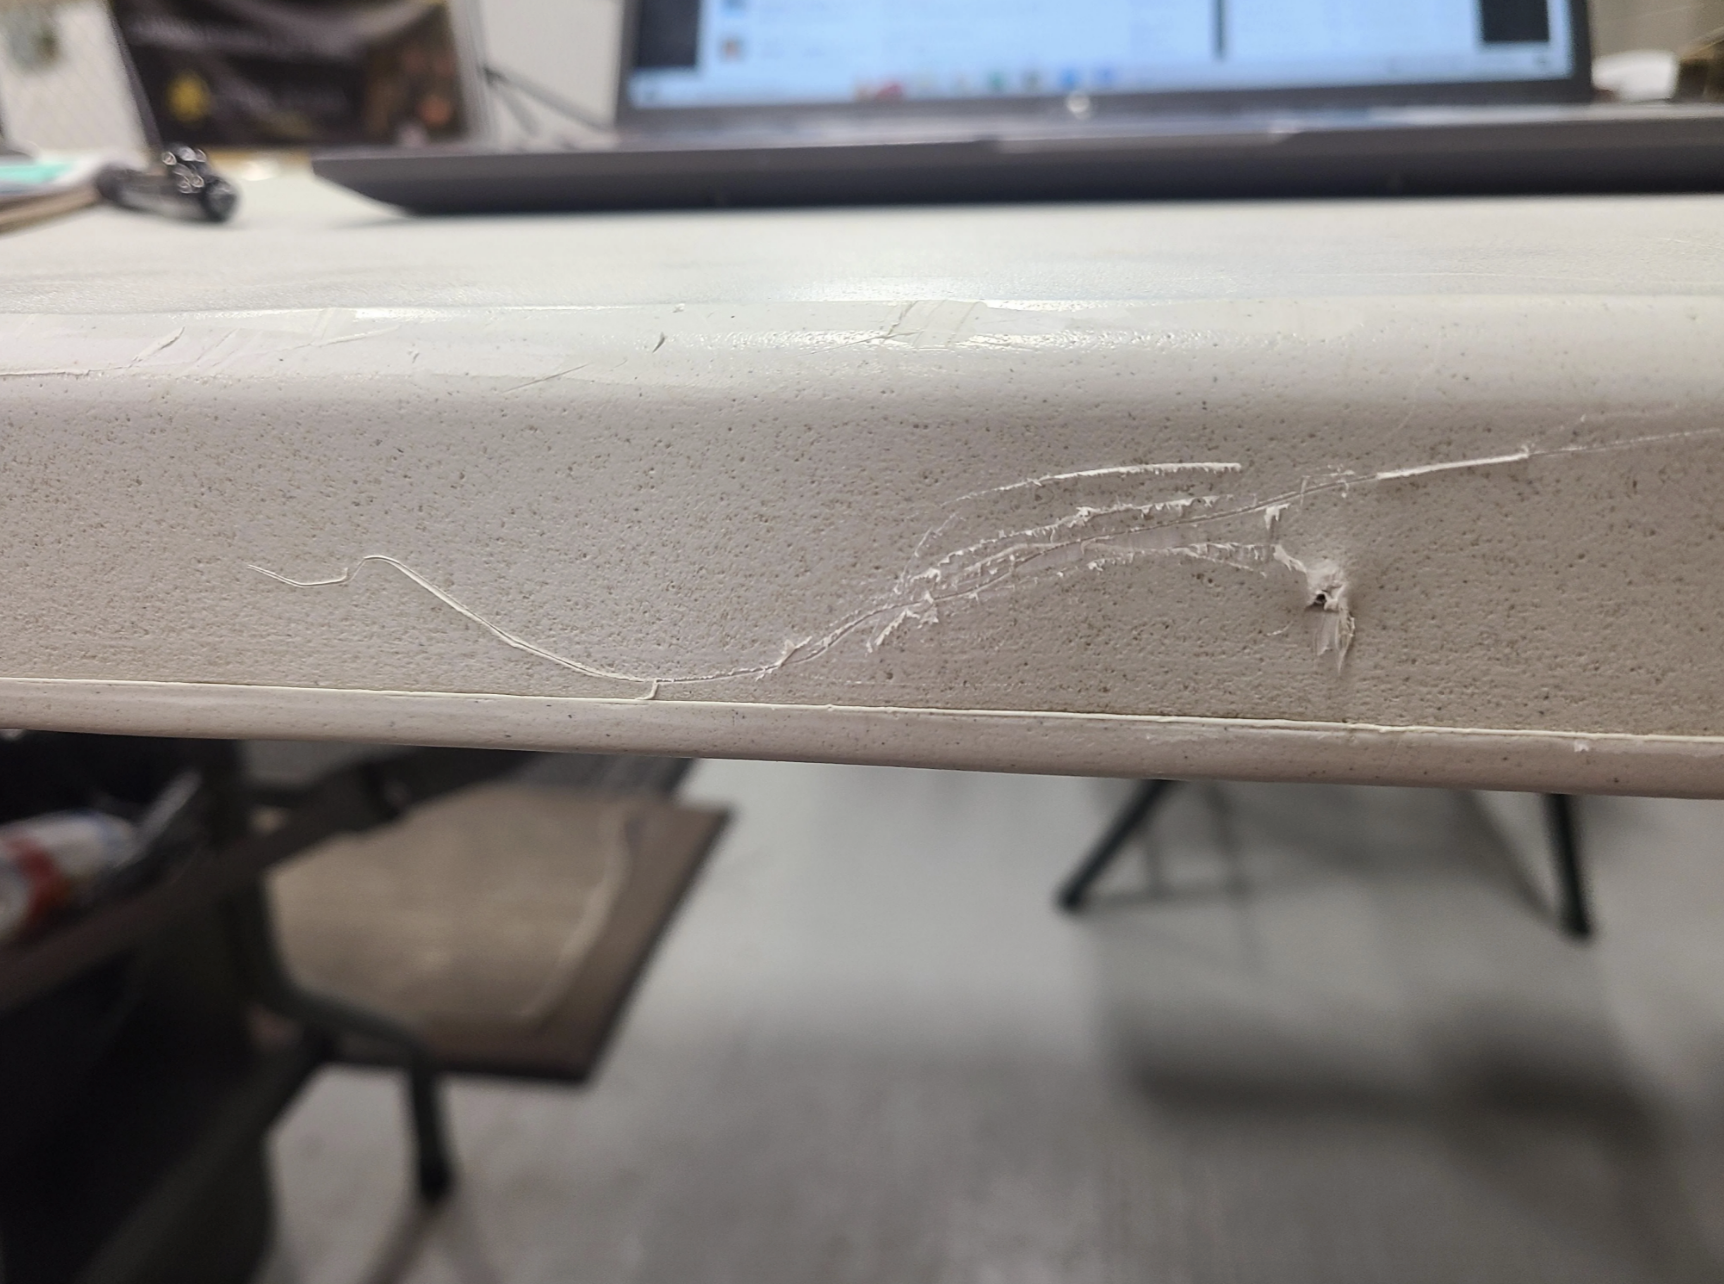 A table in what appears to be a break room has had random lines carved into it with a knife